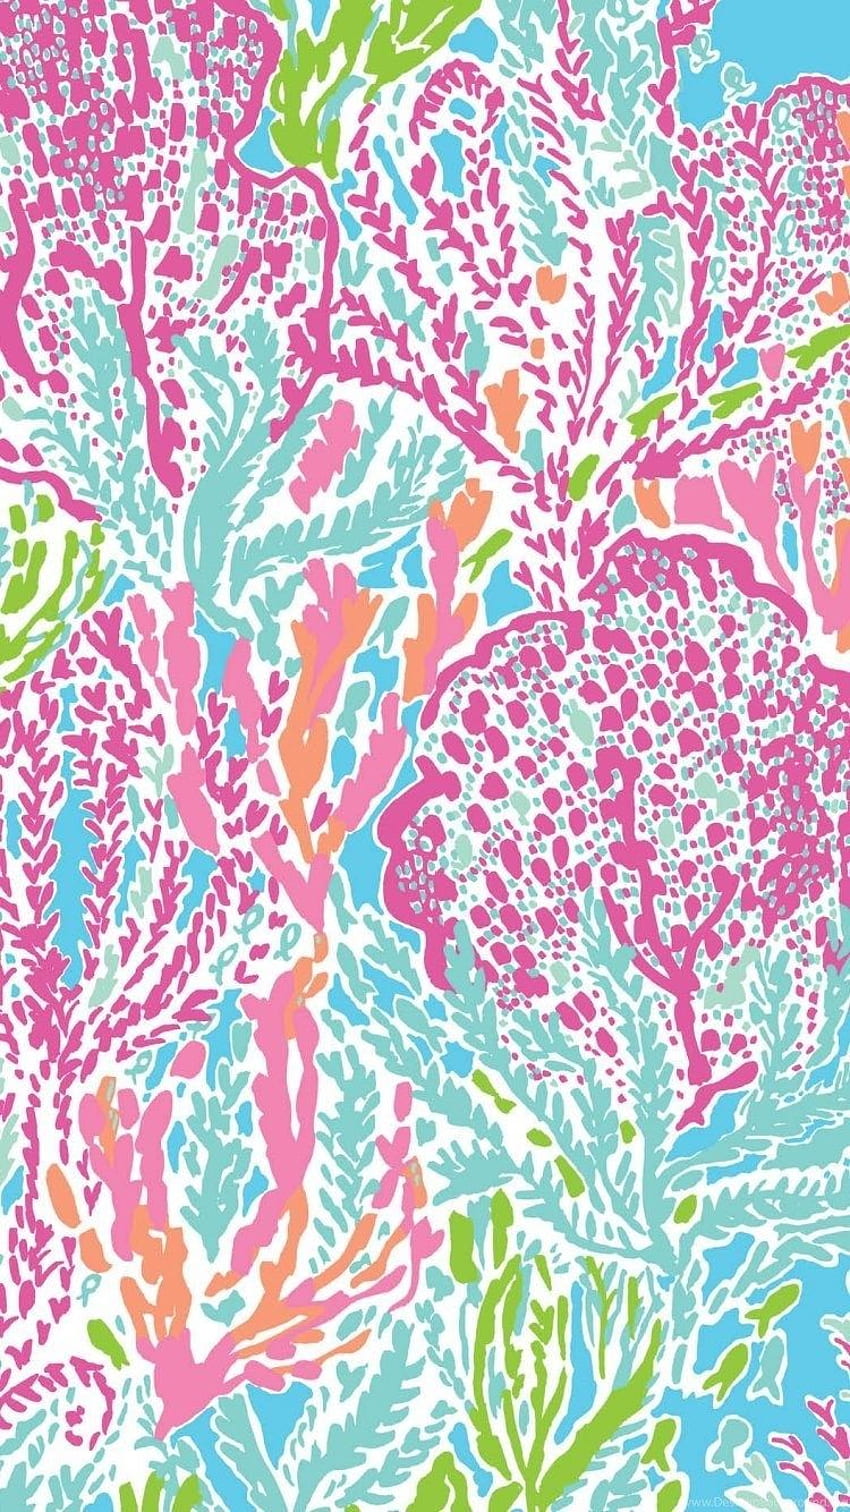 Wallpaper Lilly Pulitzer 74 images